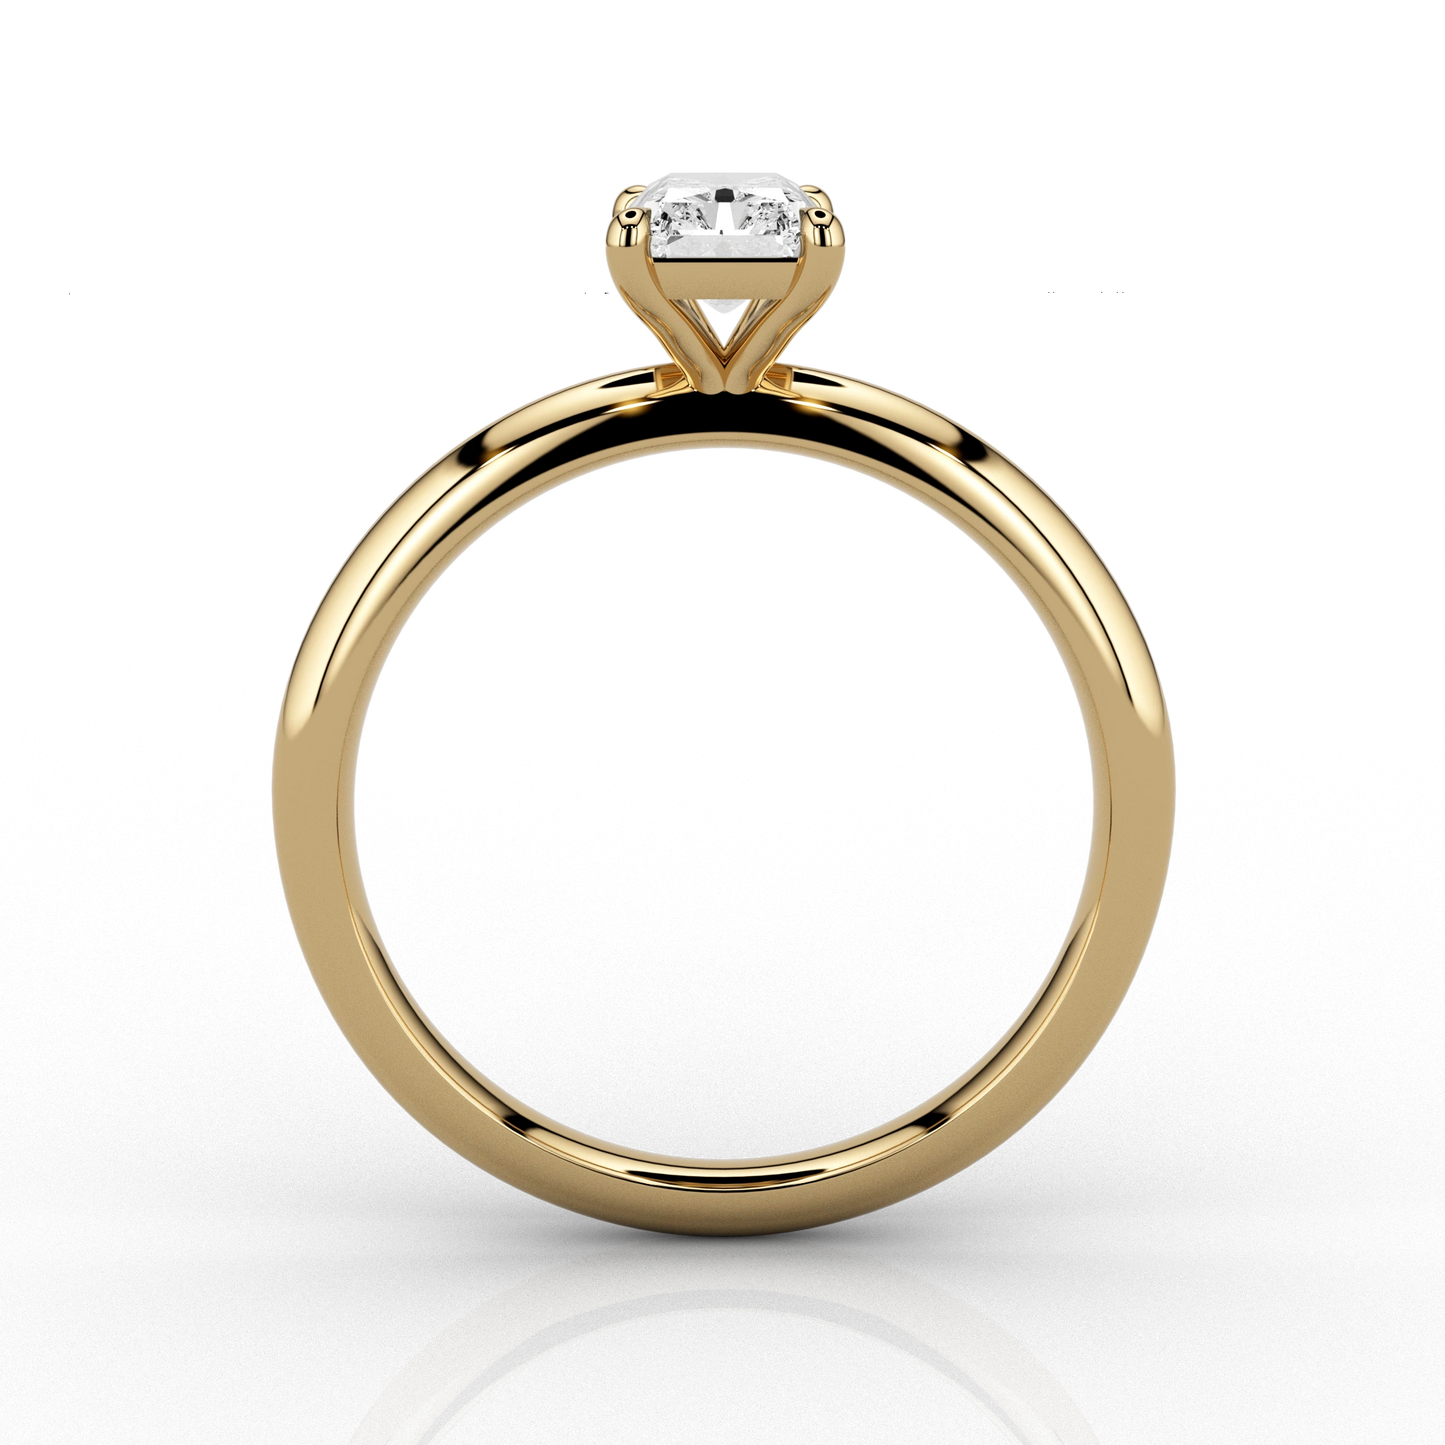 Radiant Cut Solitaire 0.7ct Engagement ring in 18ct Yellow Gold